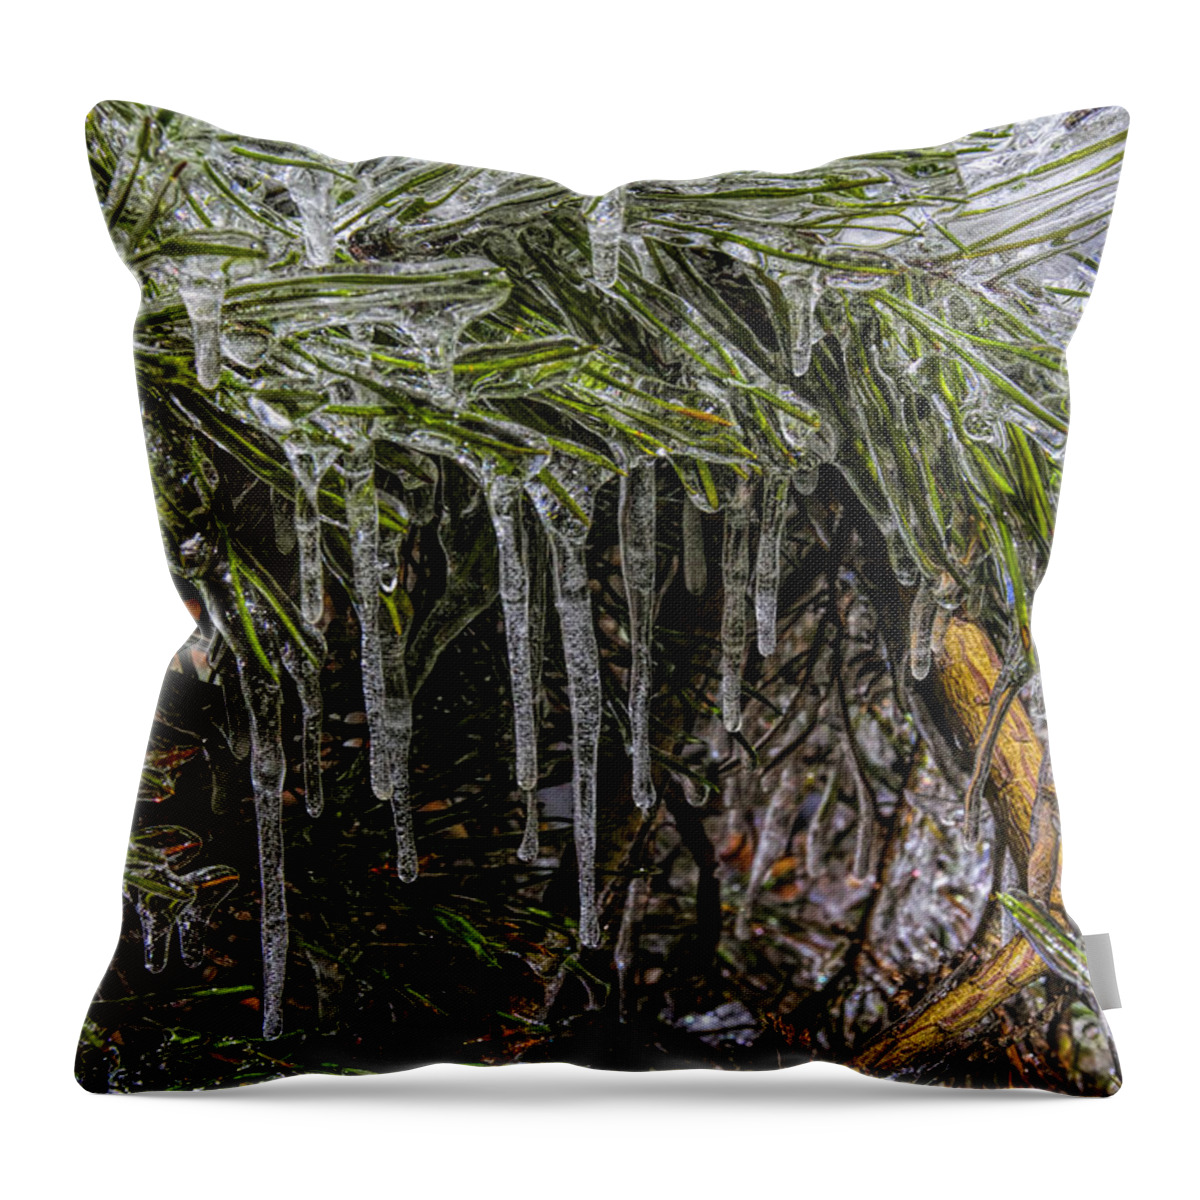 Winter Amicola Falls Throw Pillow featuring the photograph Pine Needlecicles by Barbara Bowen